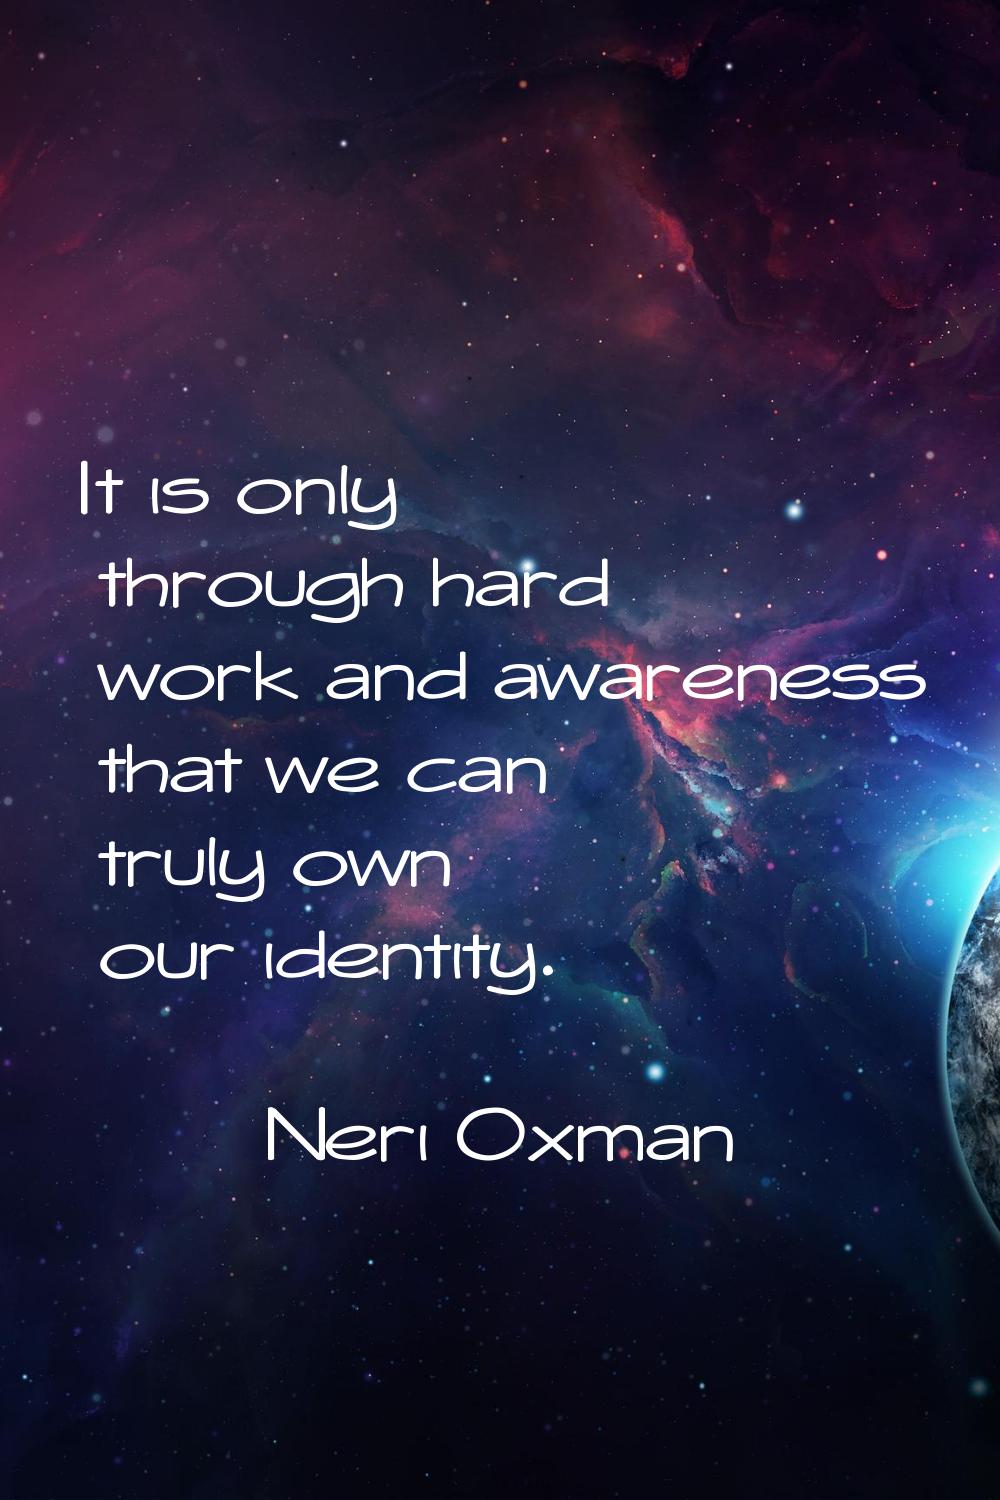 It is only through hard work and awareness that we can truly own our identity.